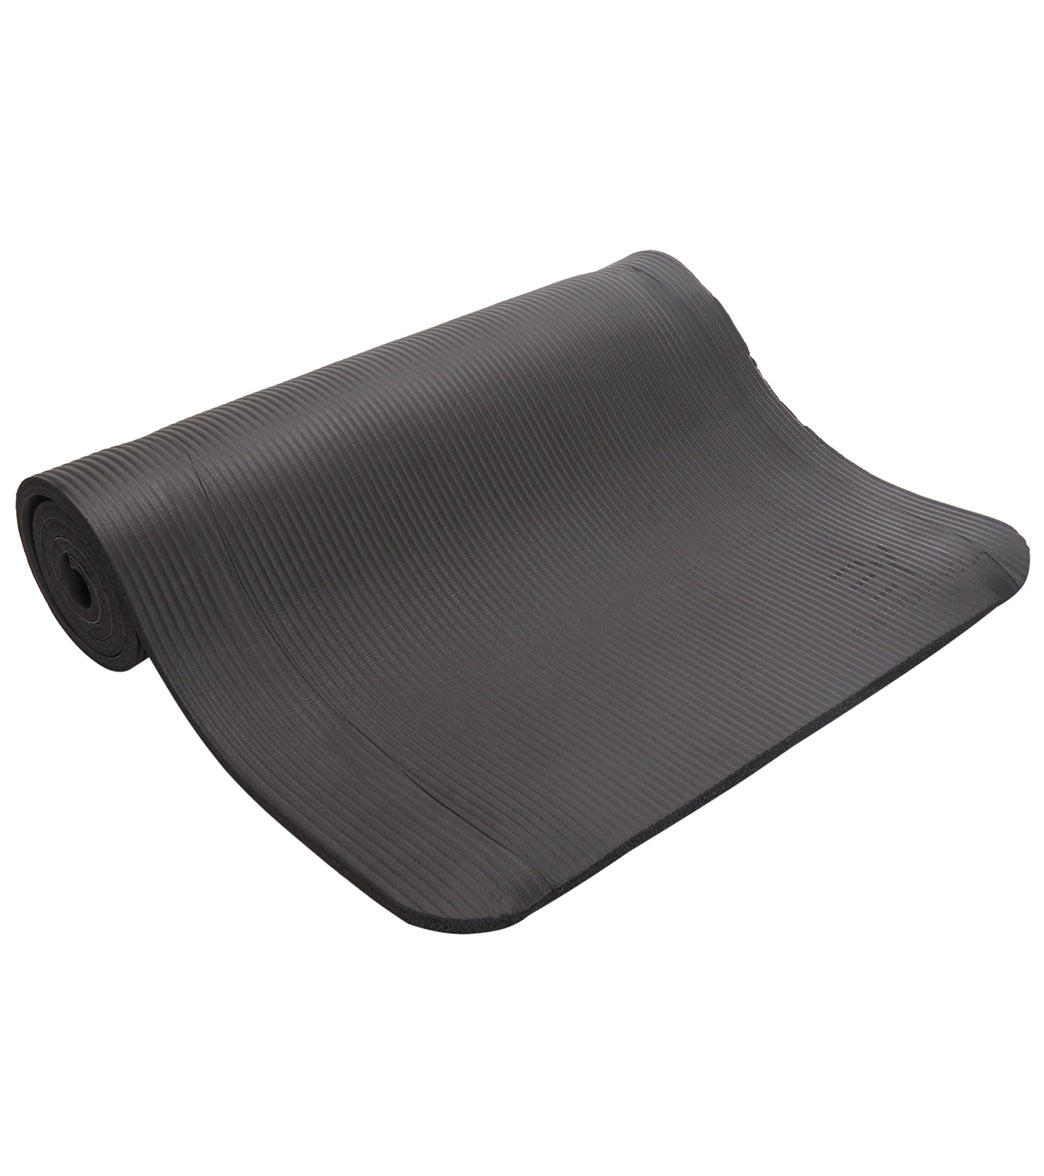 Deluxe Studio Extra Thick Yoga Mat - Charcoal